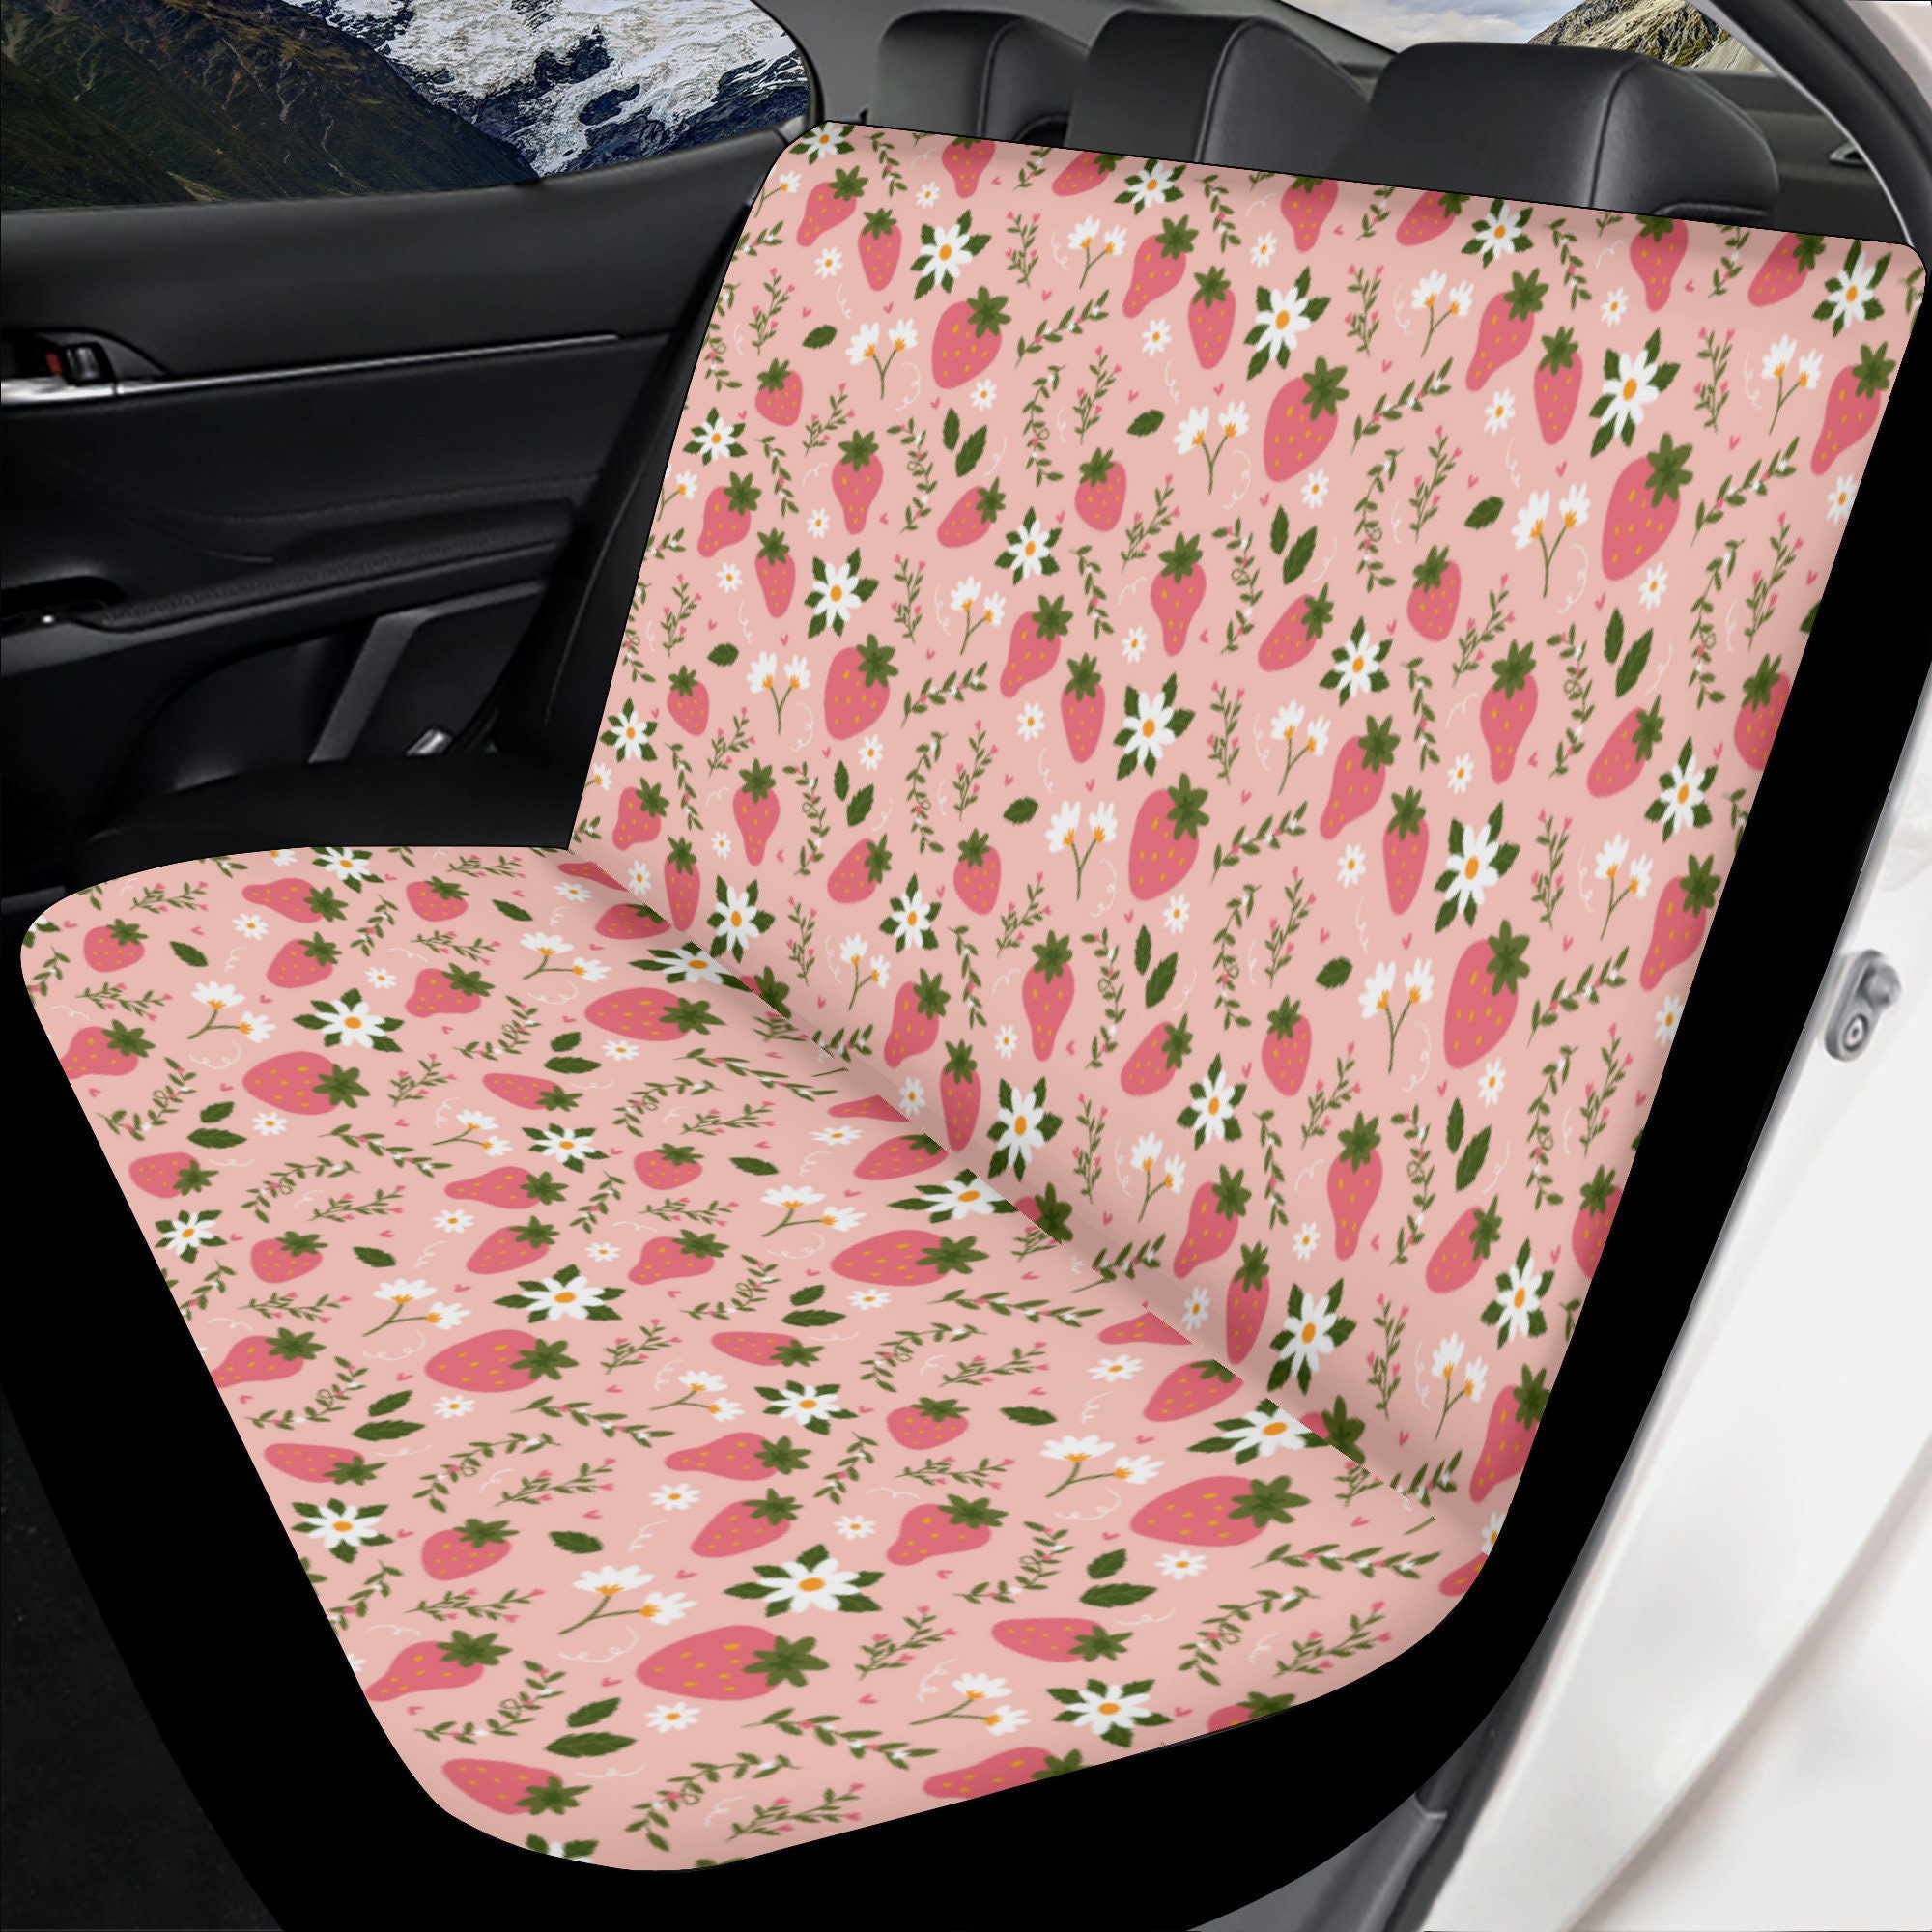 Strawberry Car Seat Covers, Strawberry Cute Car Accessories for